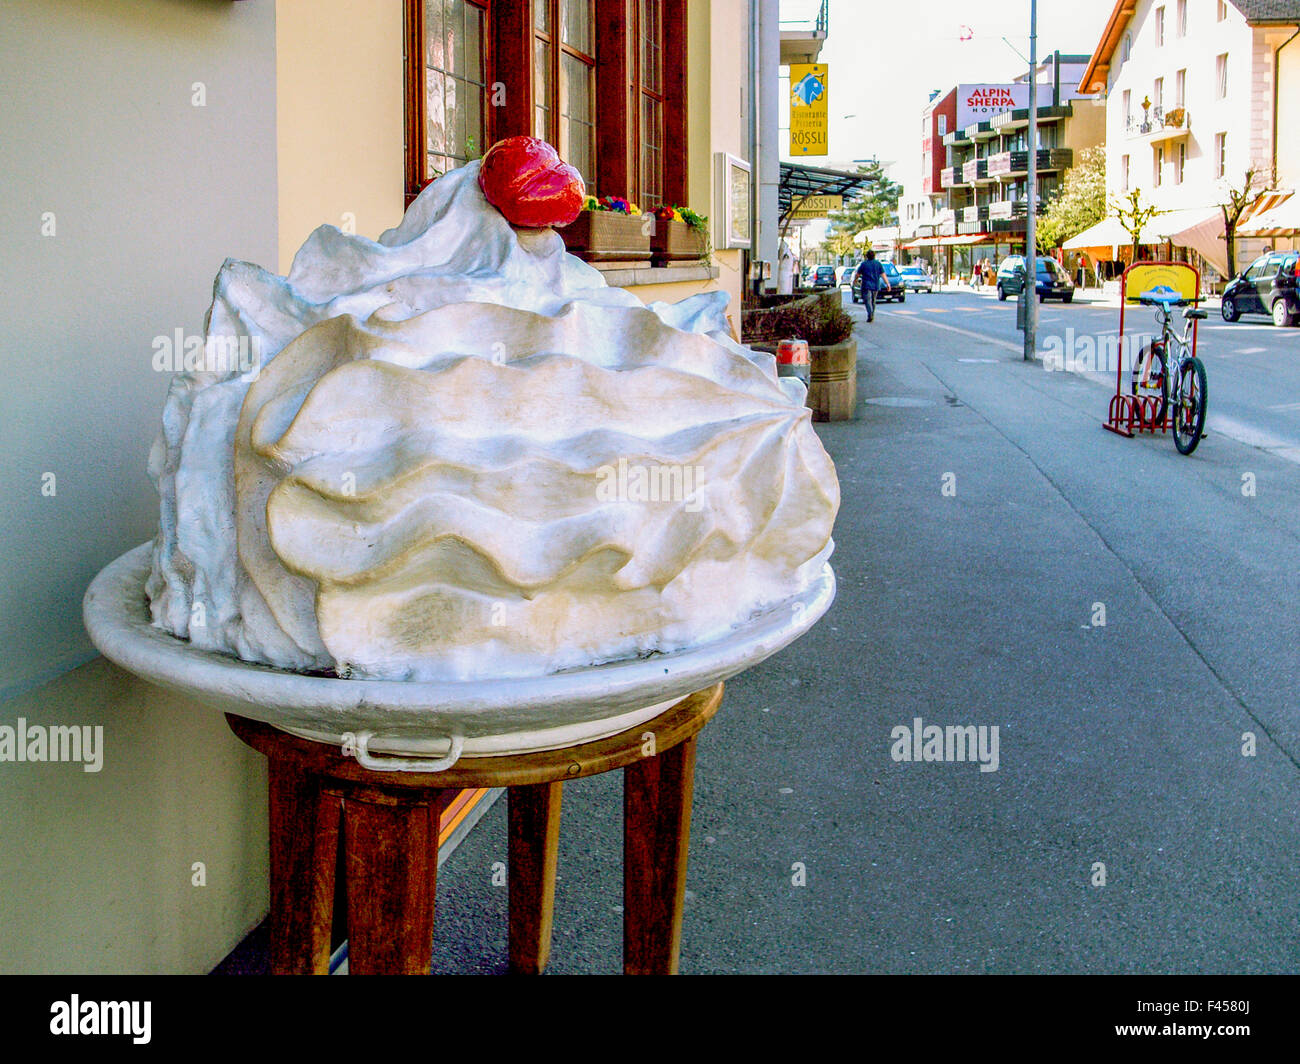 A huge model of a meringue beckons customers to a restaurant in Meiringen, Switzerland. The dessert, made with egg whites and sugar, is a signature dish in the city. Stock Photo